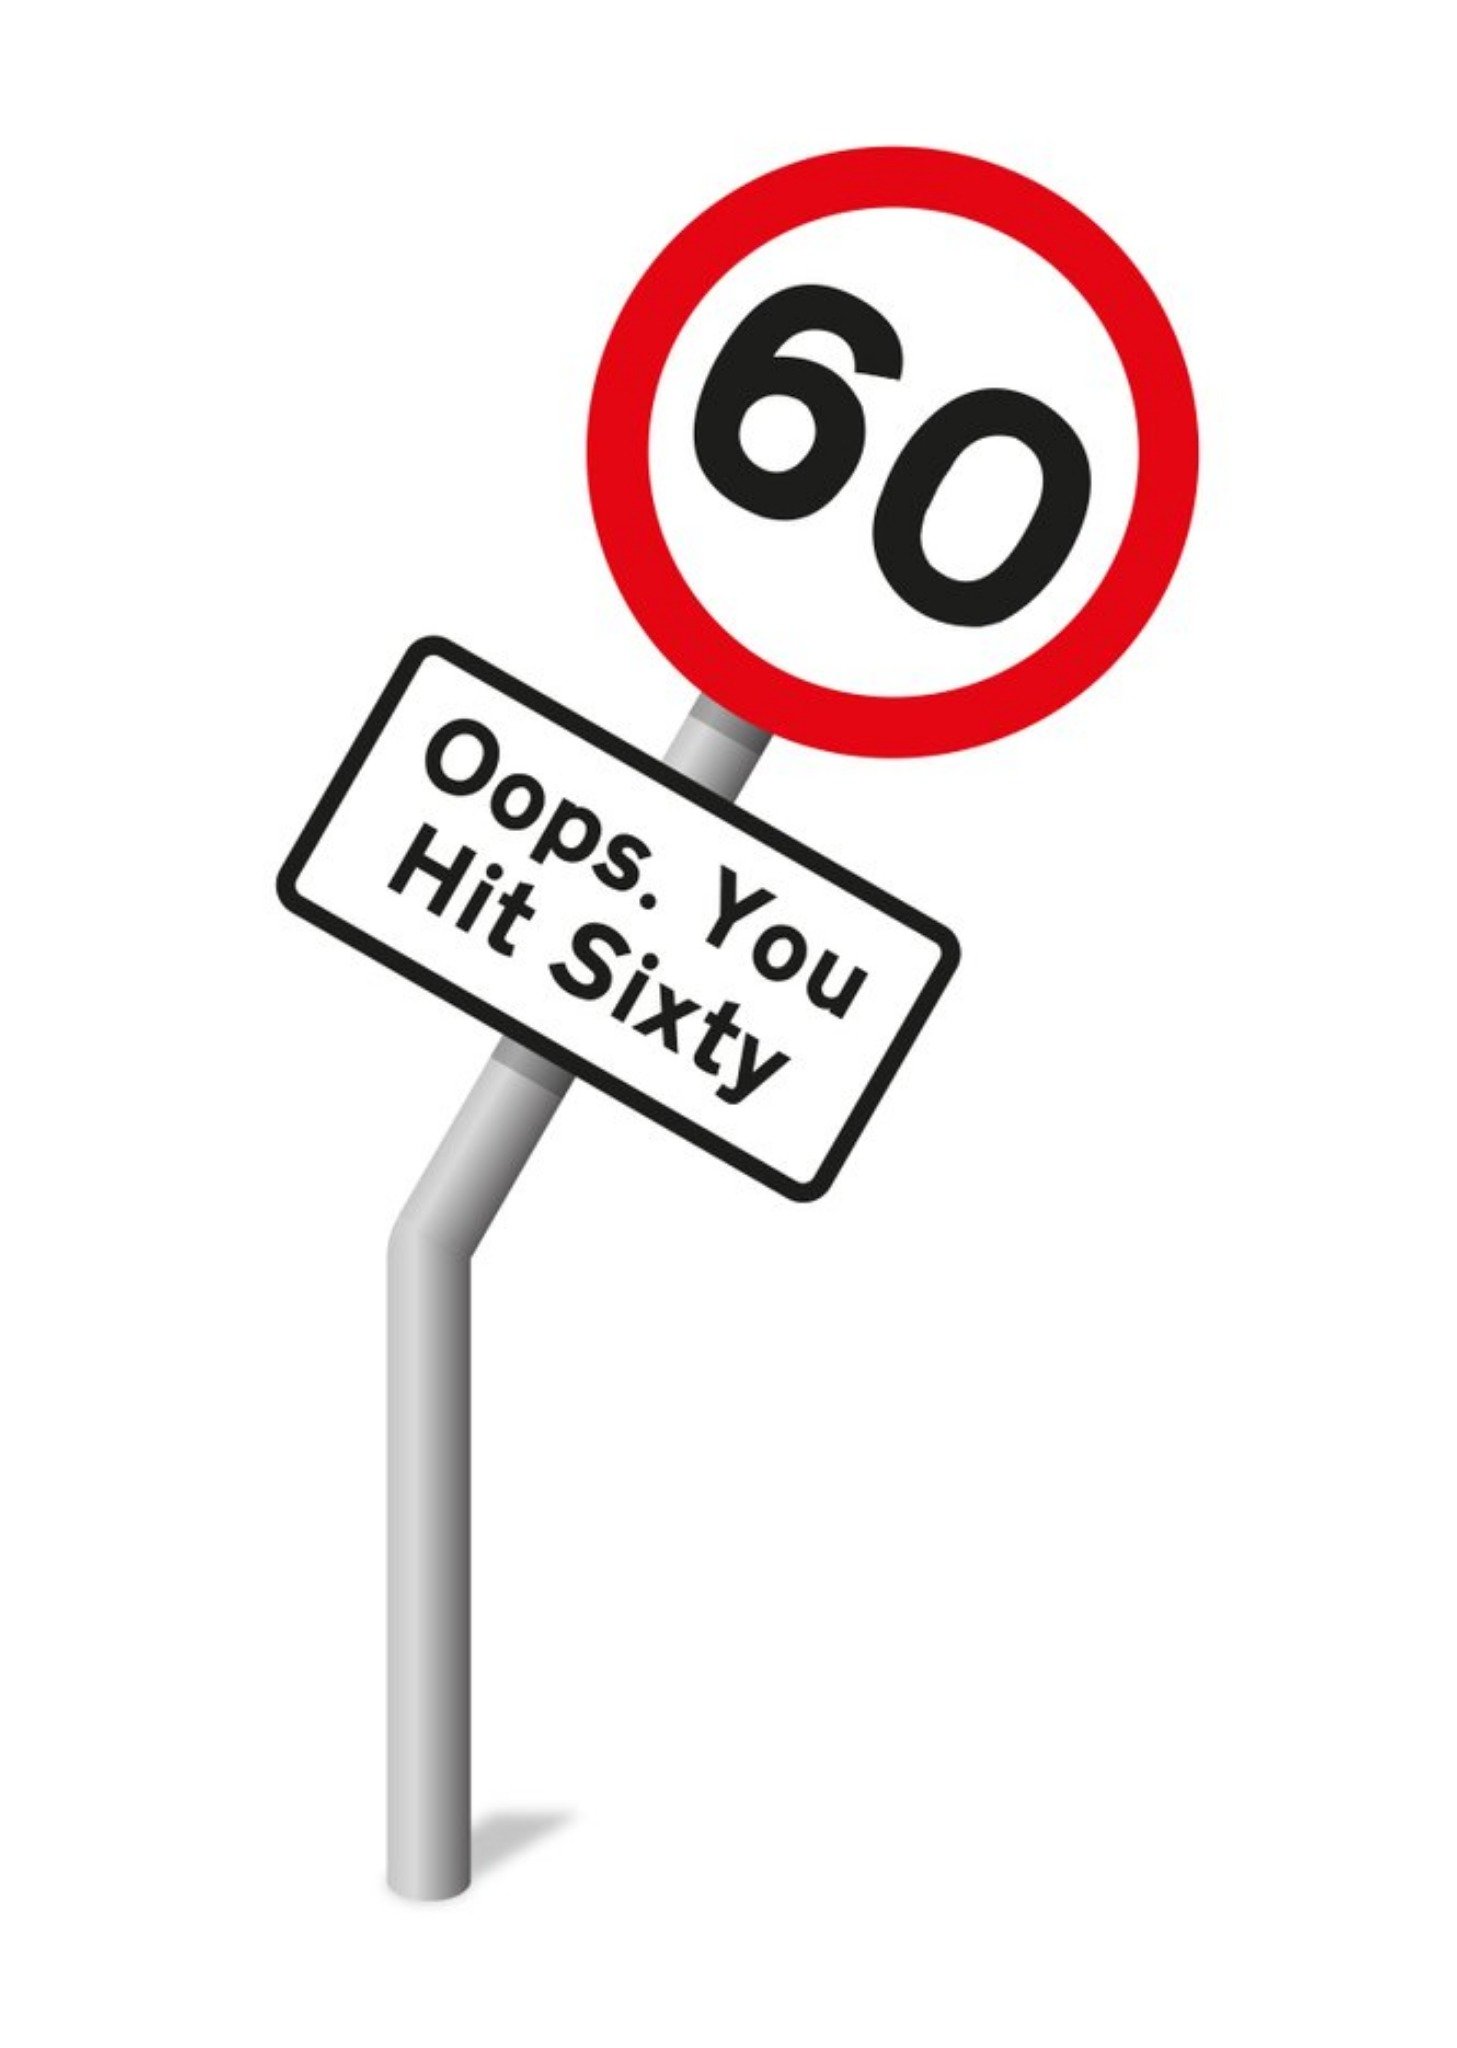 Moonpig Graphic Illustration Of A Damaged Road Sign Sixtieth Funny Pun Birthday Card Ecard